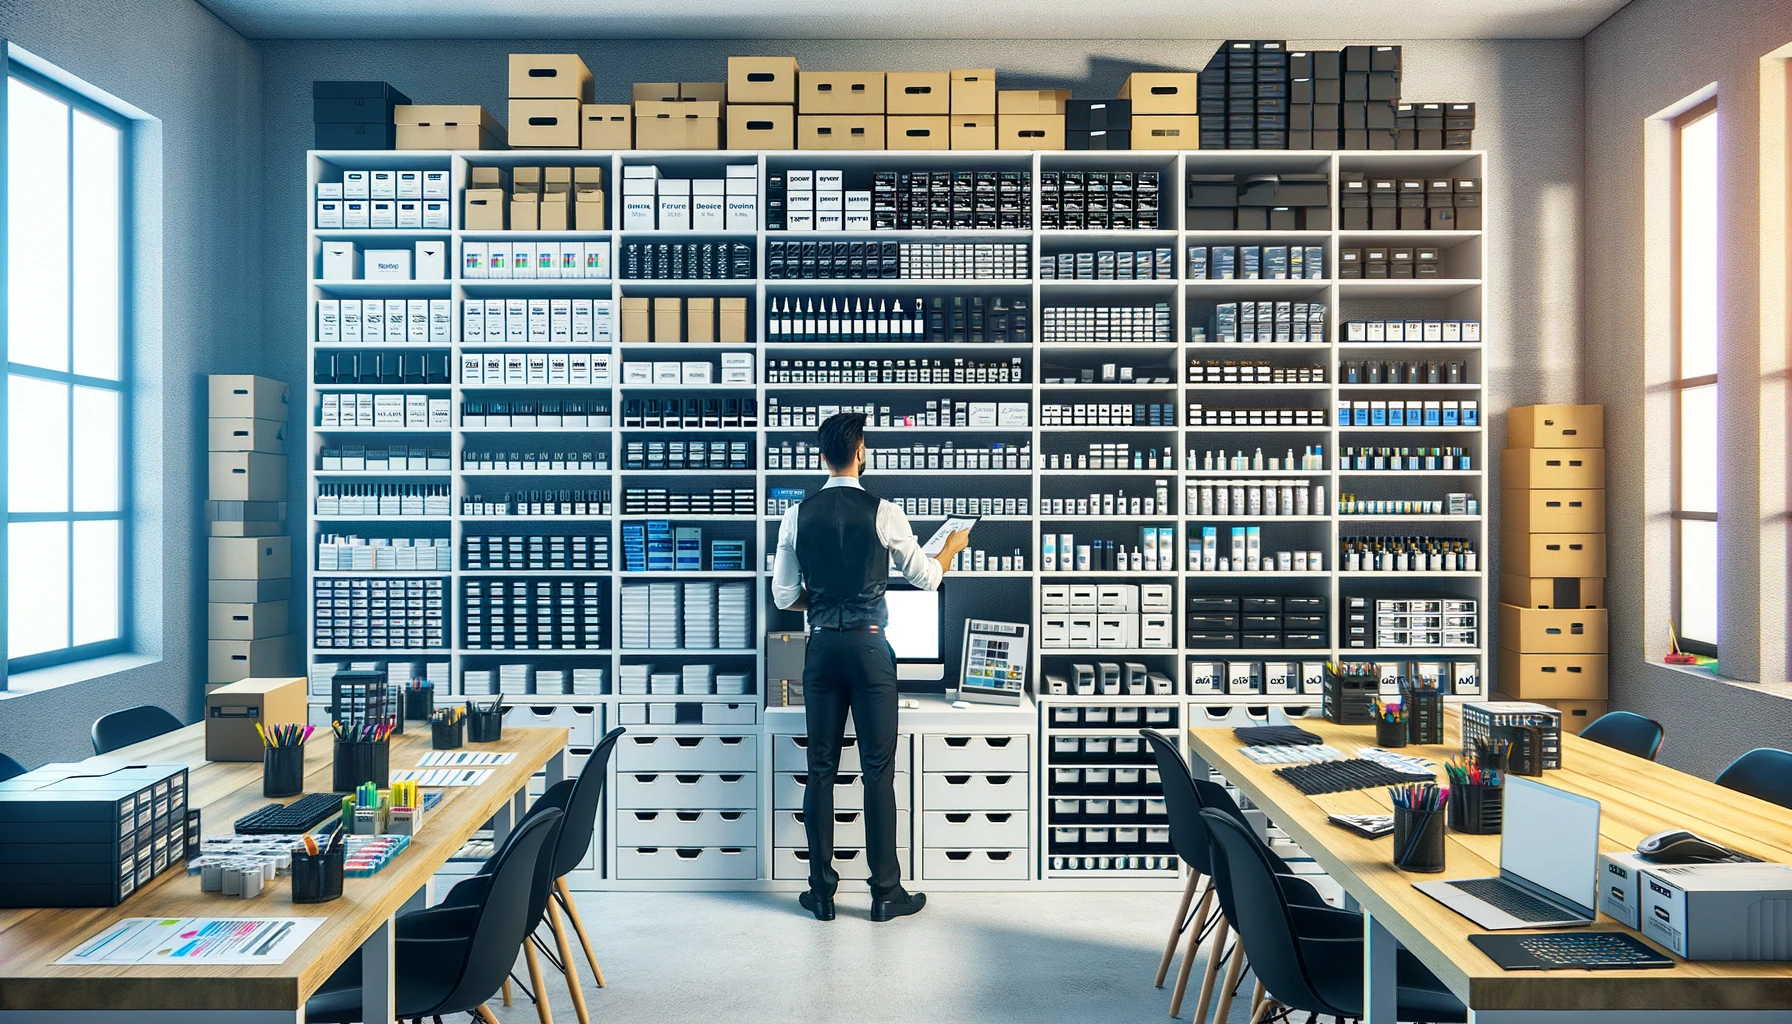 A well-organized office supply room filled with shelves stocked with various types of printer cartridges, neatly labeled and categorized by brand and model. The room is bright and orderly, with an office worker checking inventory and organizing the cartridges. The scene reflects a professional and efficient approach to managing office supplies, emphasizing the importance of having a wide range of cartridges readily available for different office printers.